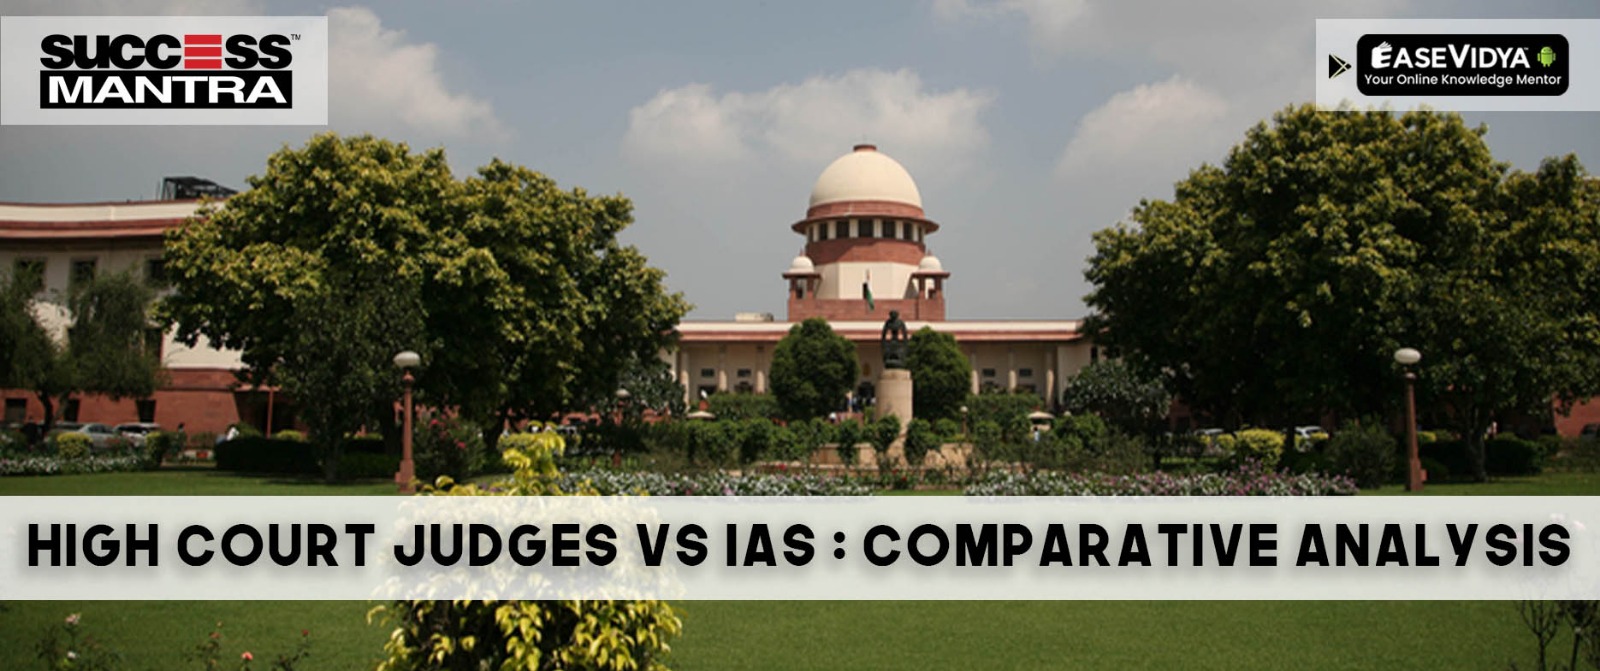 High Court Judge vs. IAS Officer - A Comparison of Powers